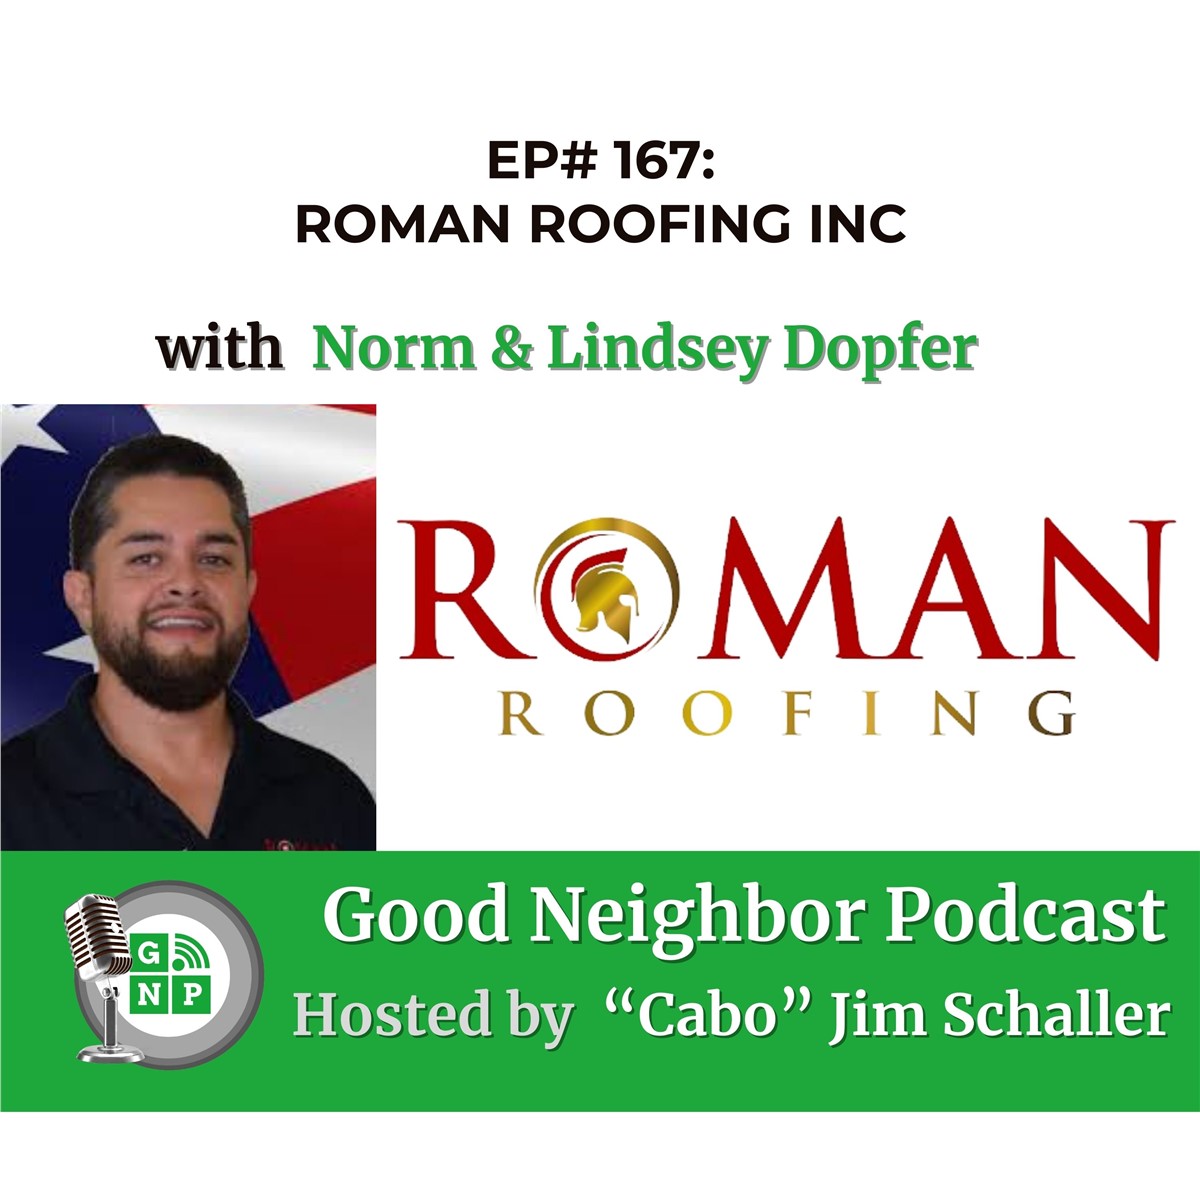 From Fitness to Roofing: The Inspiring Journey of Norm and Lindsey Dopfer of Roman Roofing